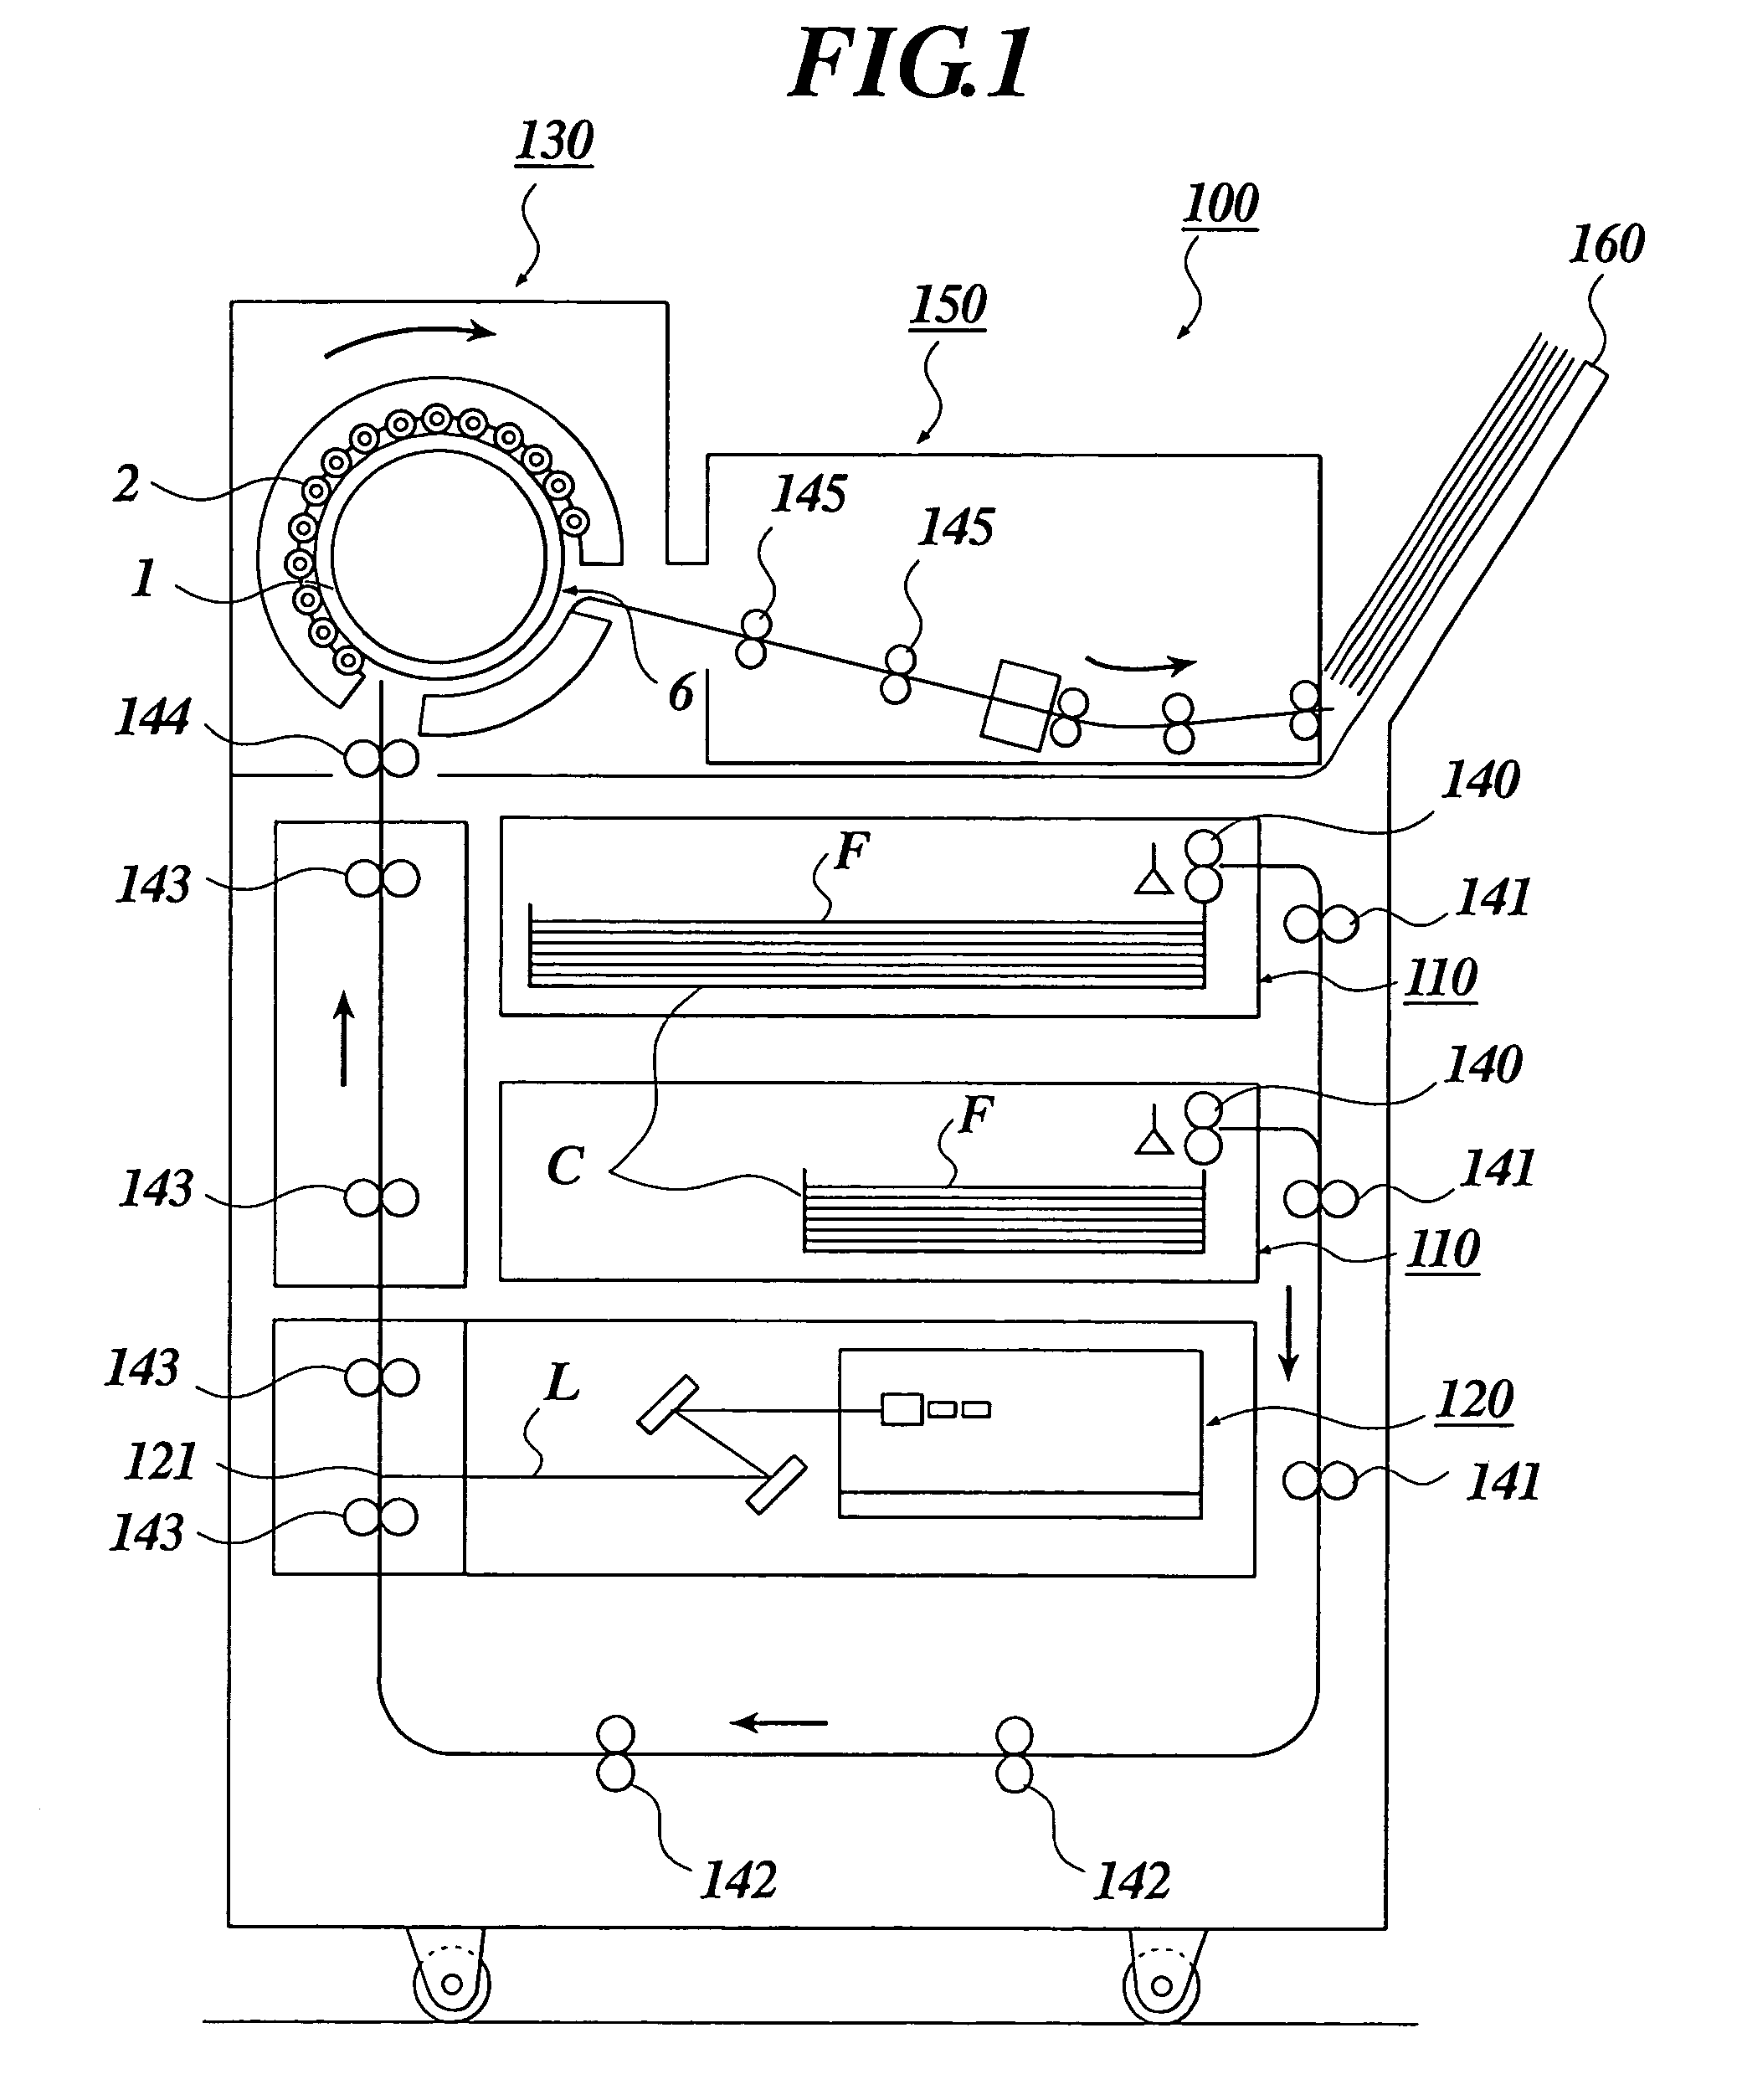 Silver salt photothermographic dry imaging material, image recording method and image forming method for the same